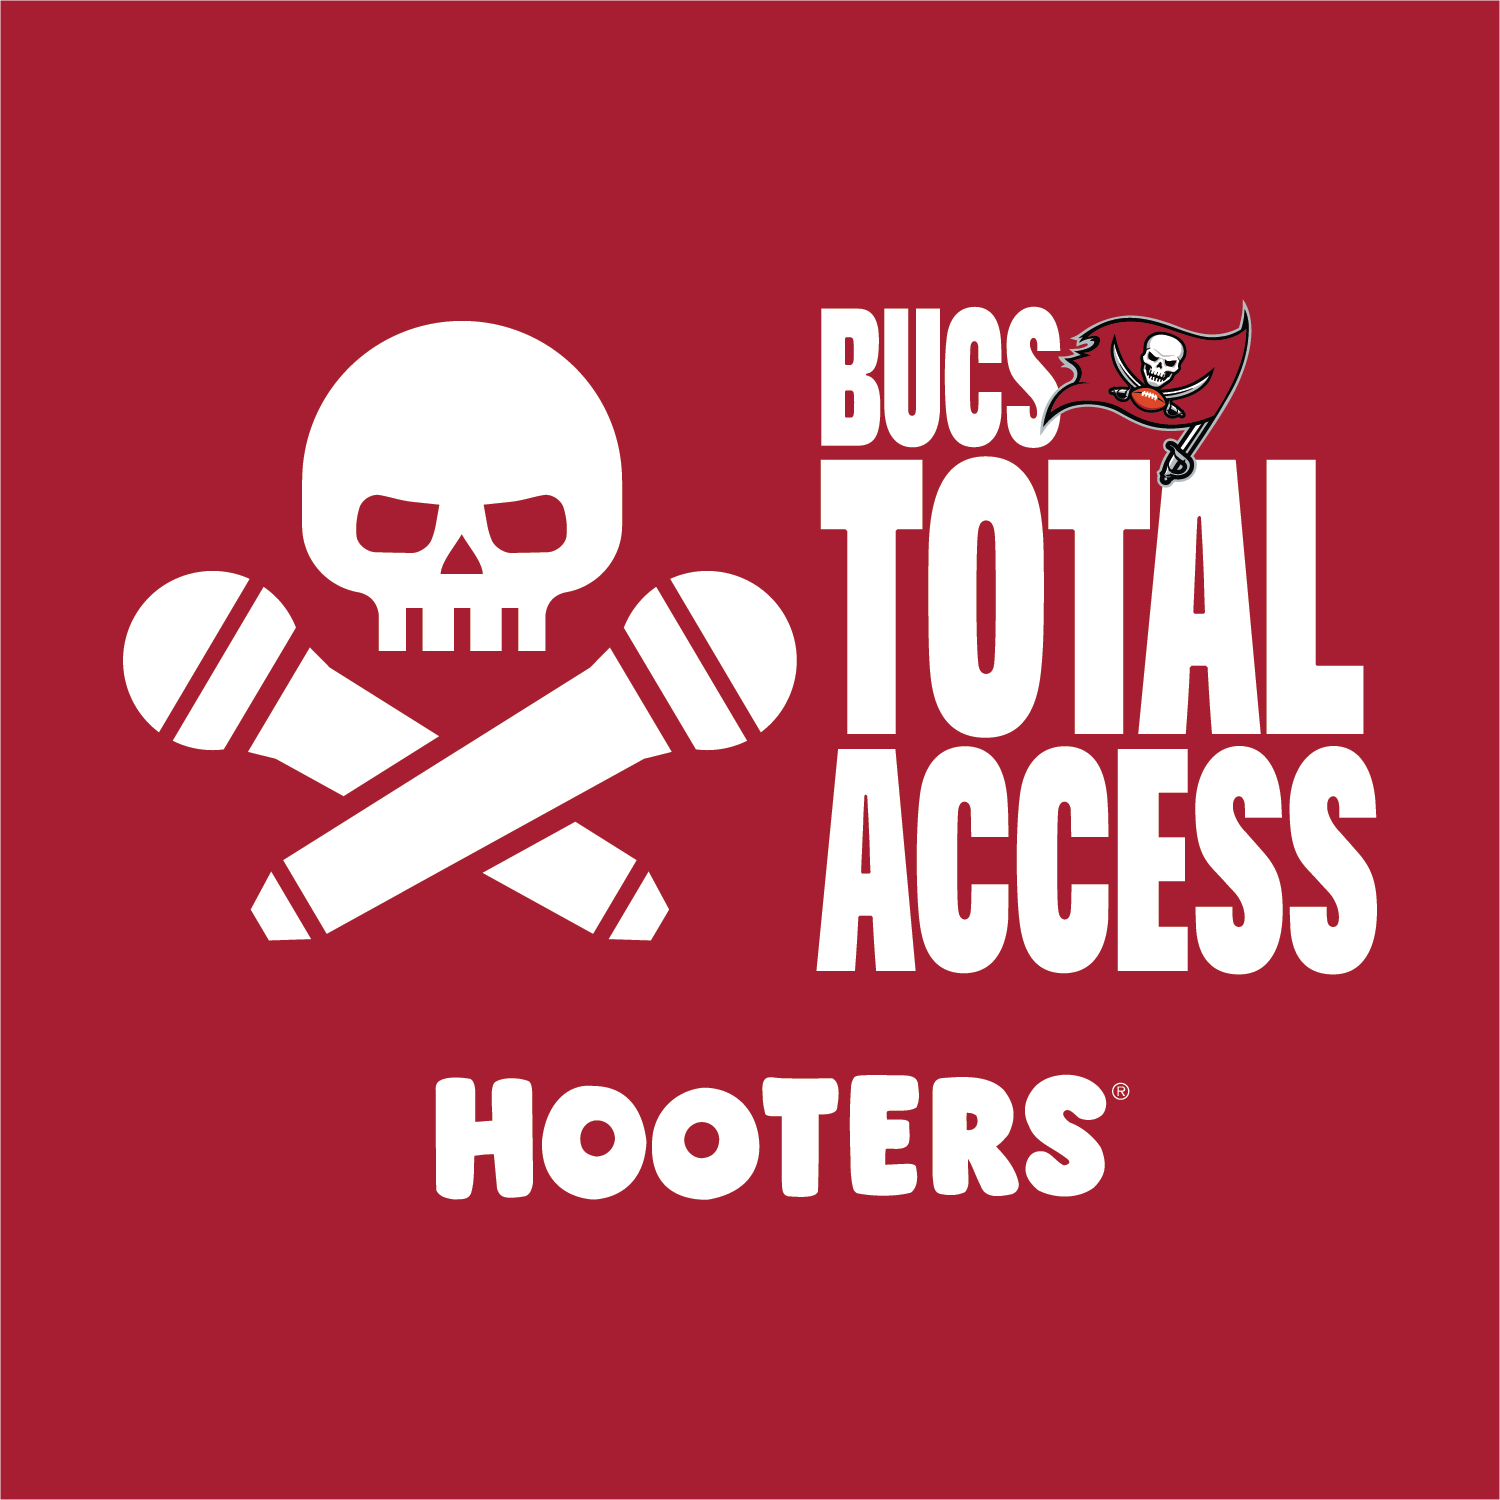 Bucs Defying Expectations, Writing Their Own Narrative | Bucs Total Access